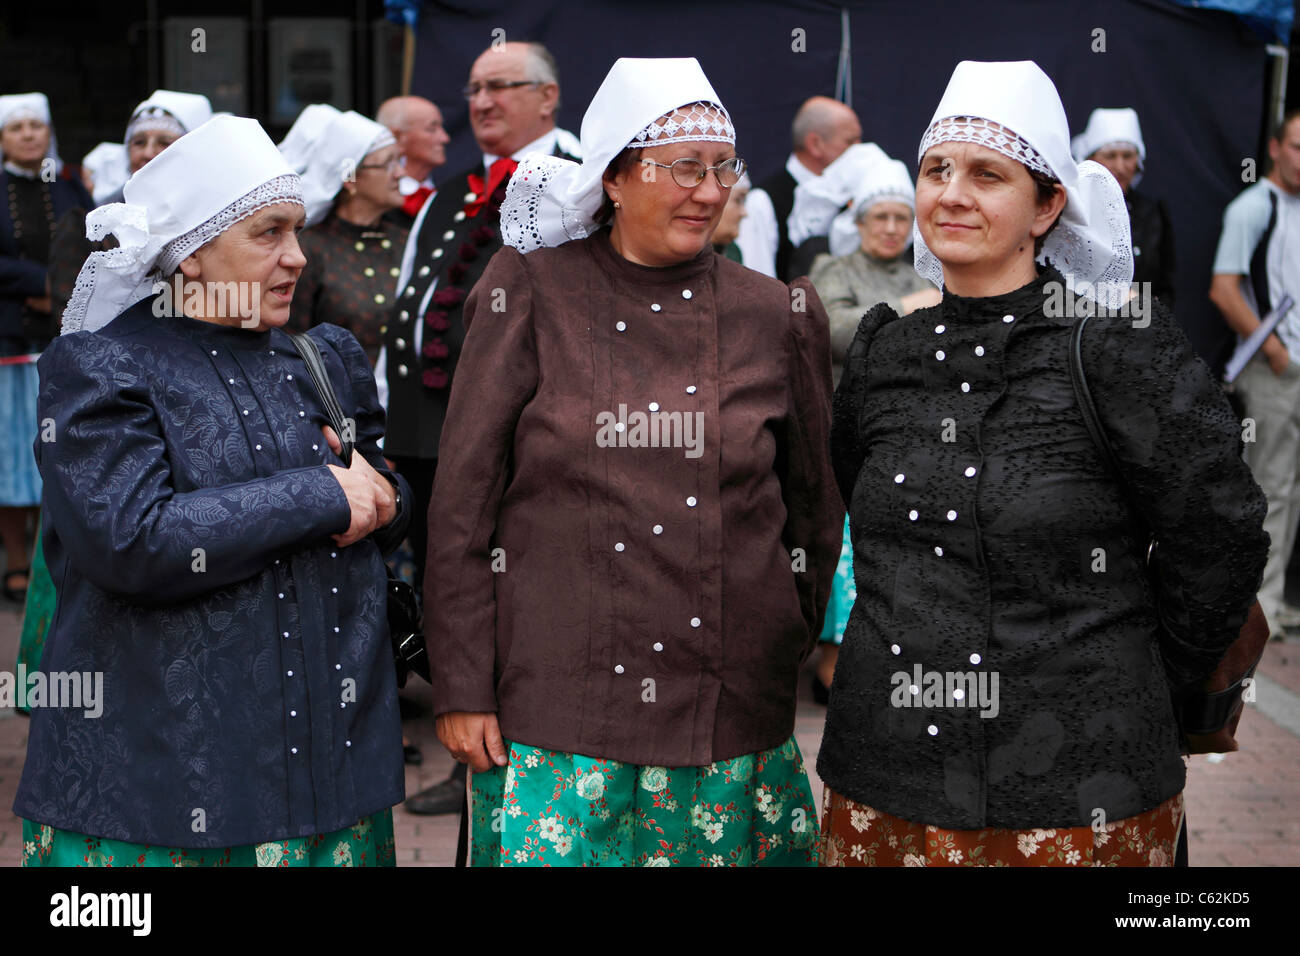 Senior members of Silesian folklore group dressed in traditional clothes during performance. Katowice, Poland. Stock Photo